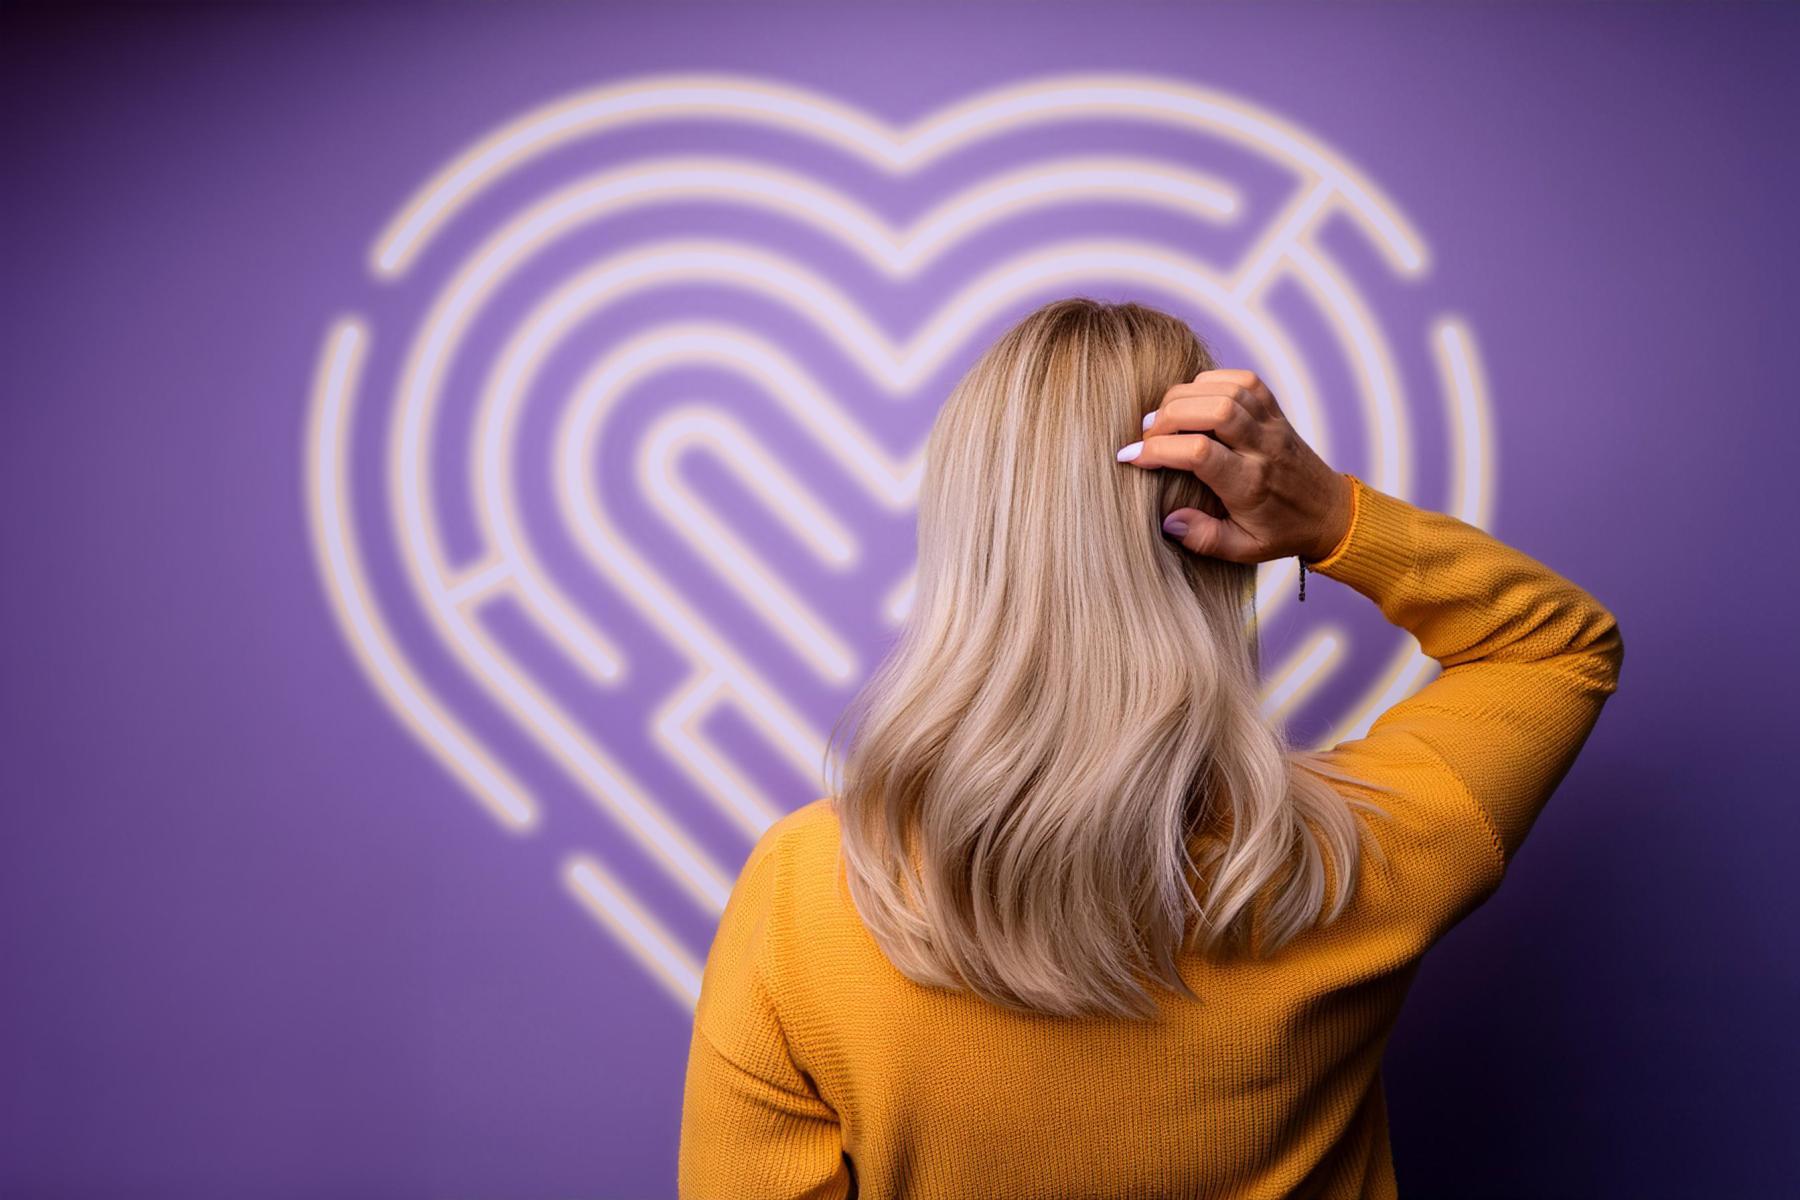 Woman looking at image of a maze shaped like a heart